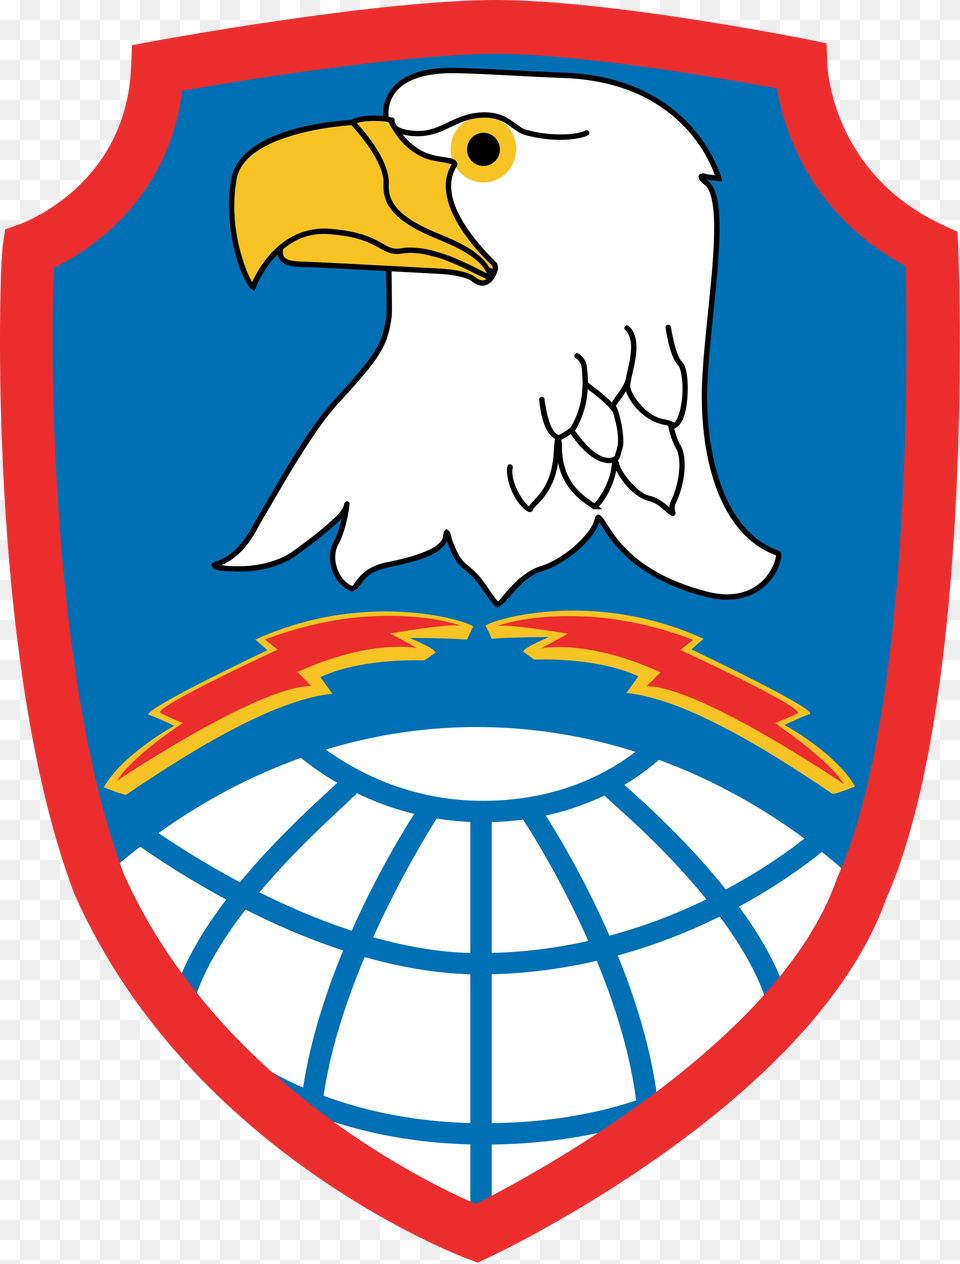 United States Army Space And Missile Defense Command Logo, Armor, Shield Free Transparent Png